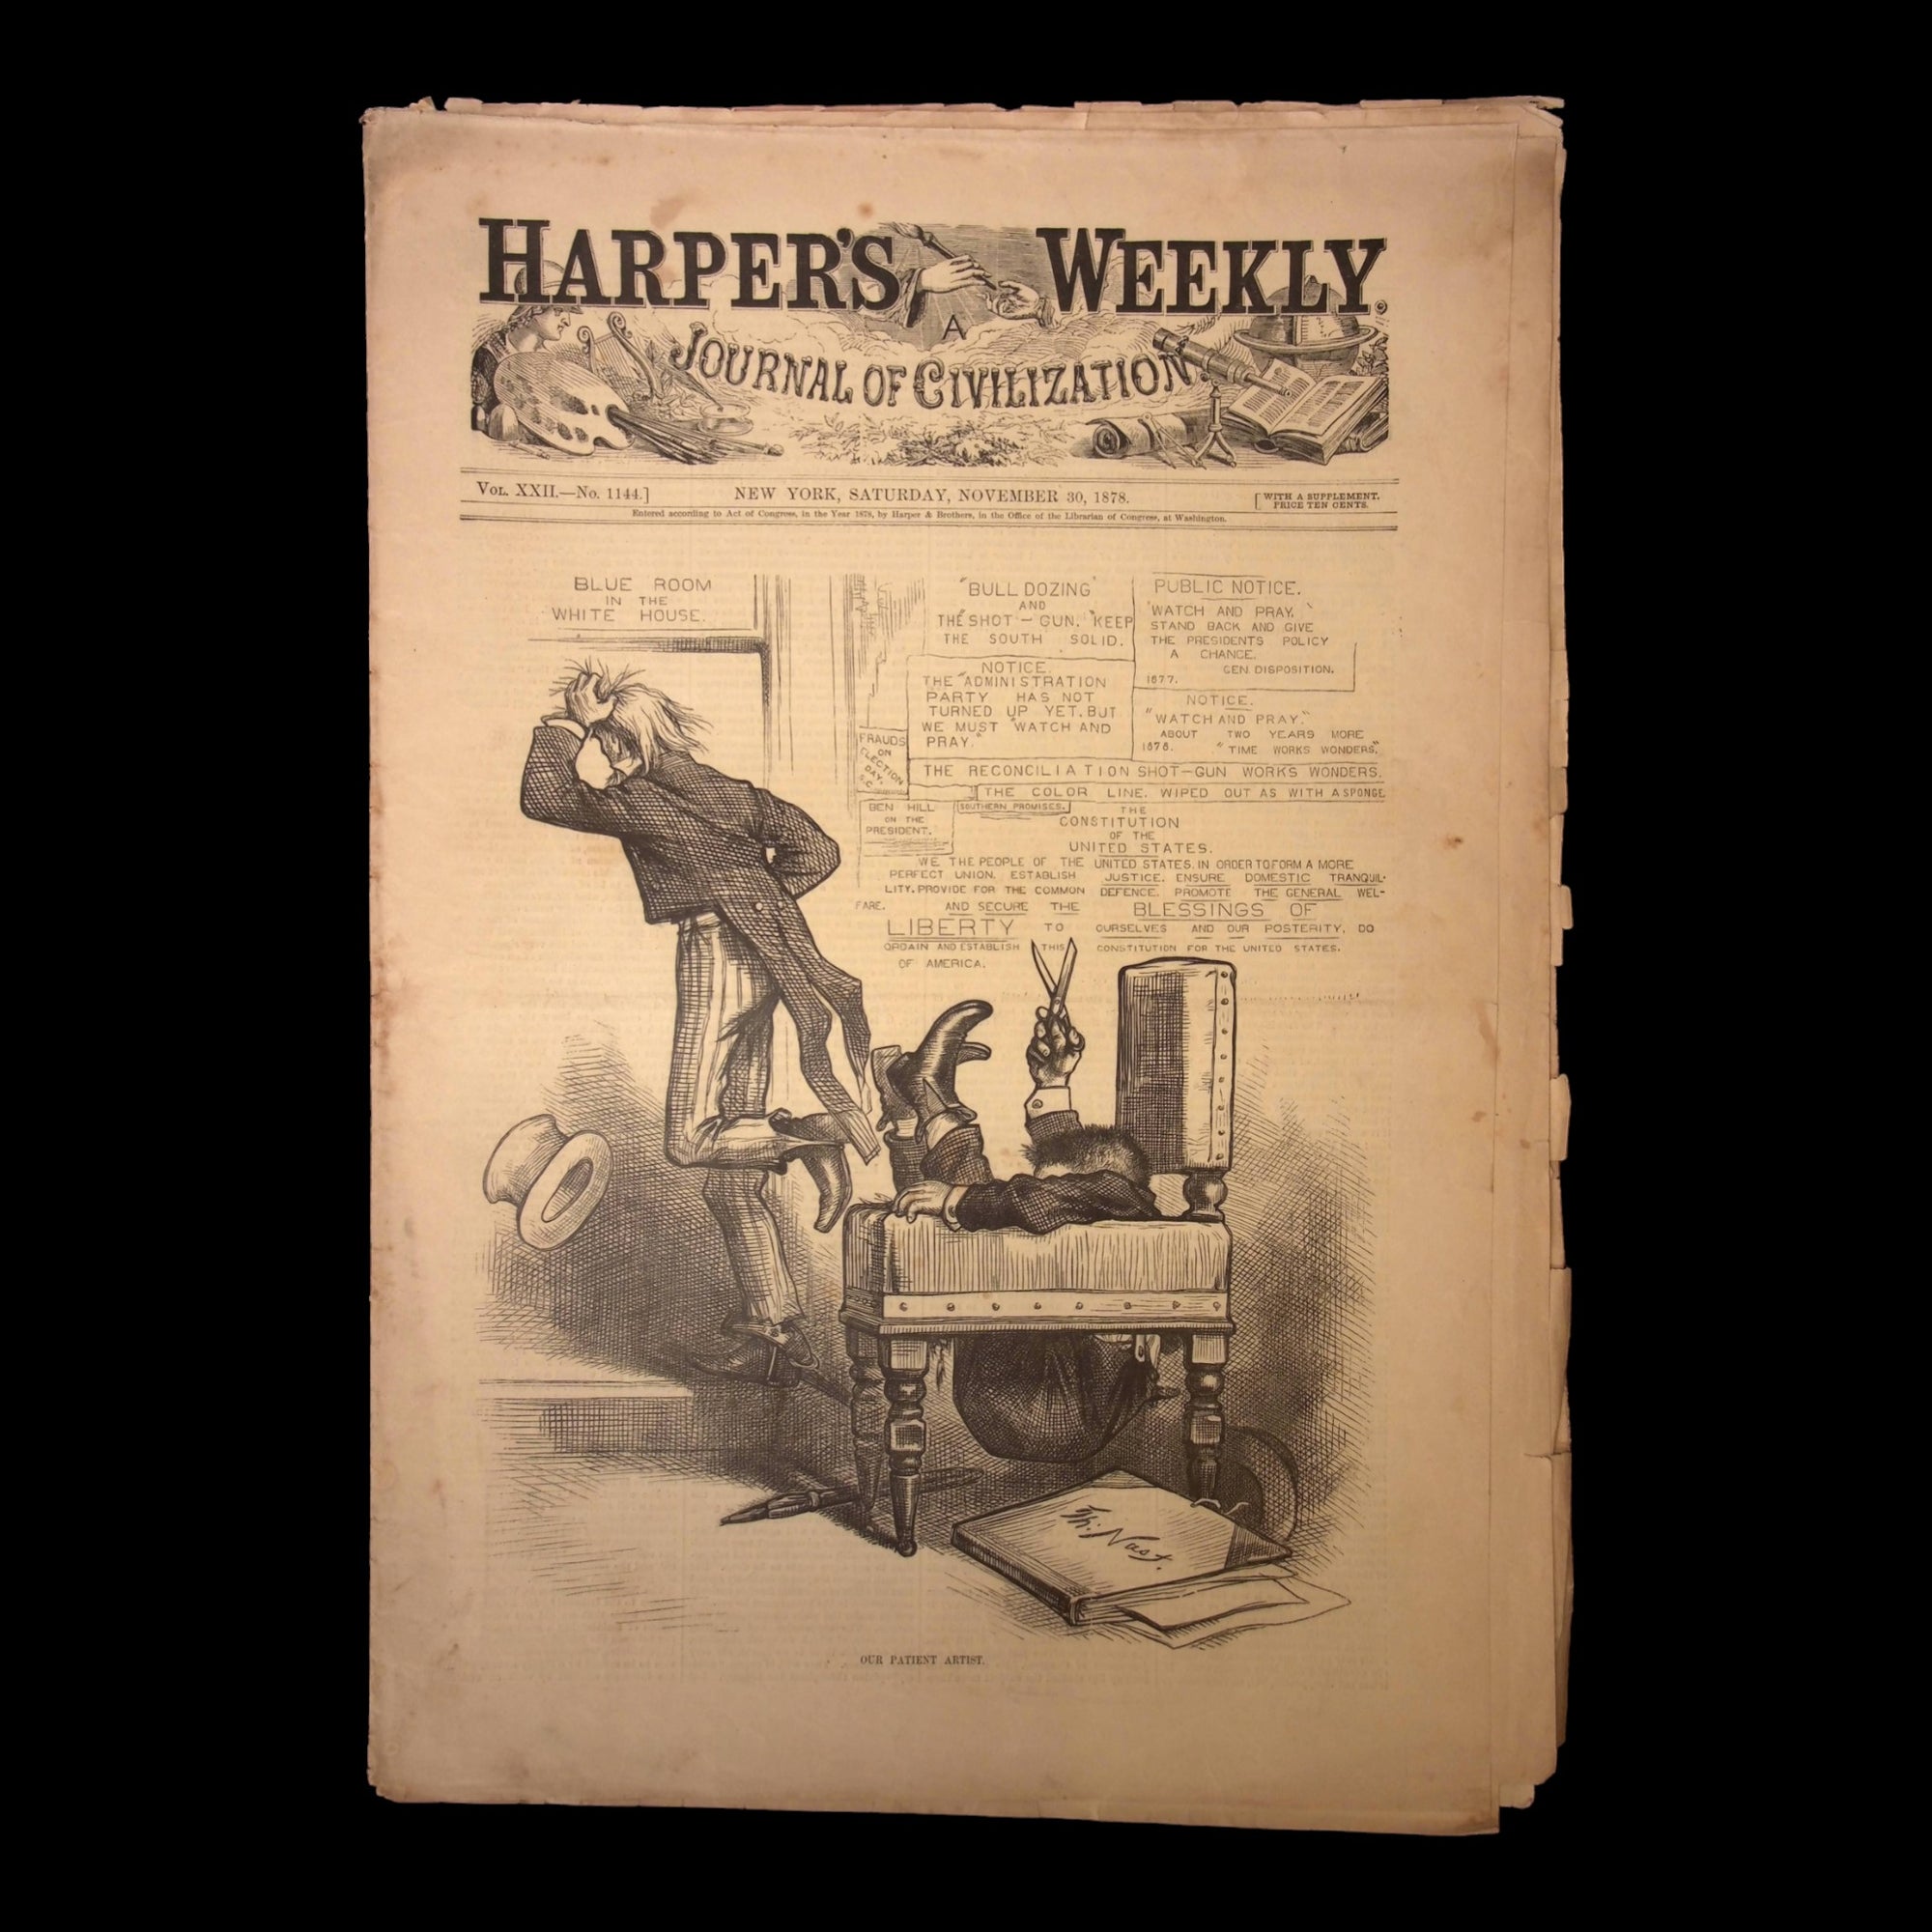 Harper's Weekly: Uncle Sam Cover, Illustrations from Turkey, Afghanistan, Europe — Nov. 30th, 1878